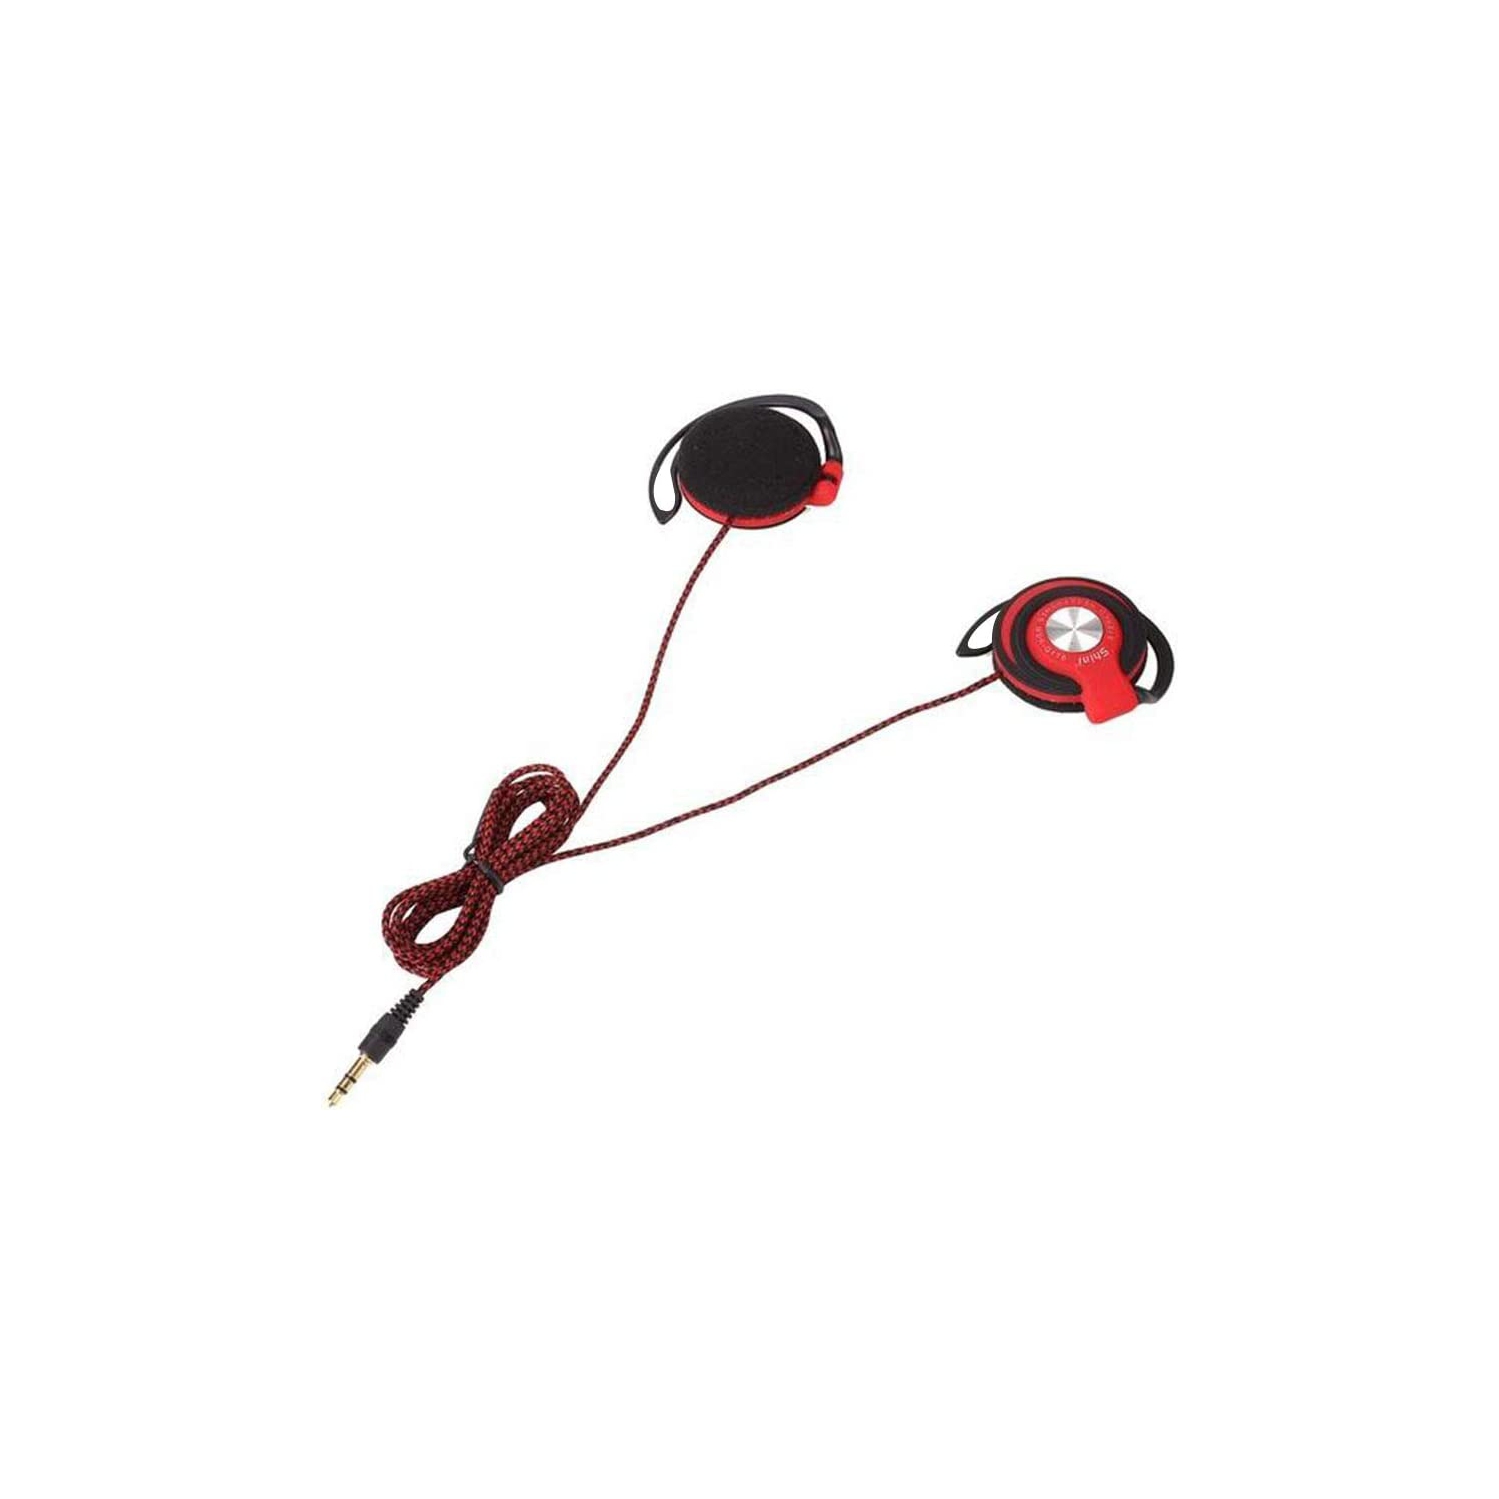 3. 5mm Wired Headset Clip On Ear Headphones EarHook Earphone Stereo Headphones for Mp3 Player Computer (Red)